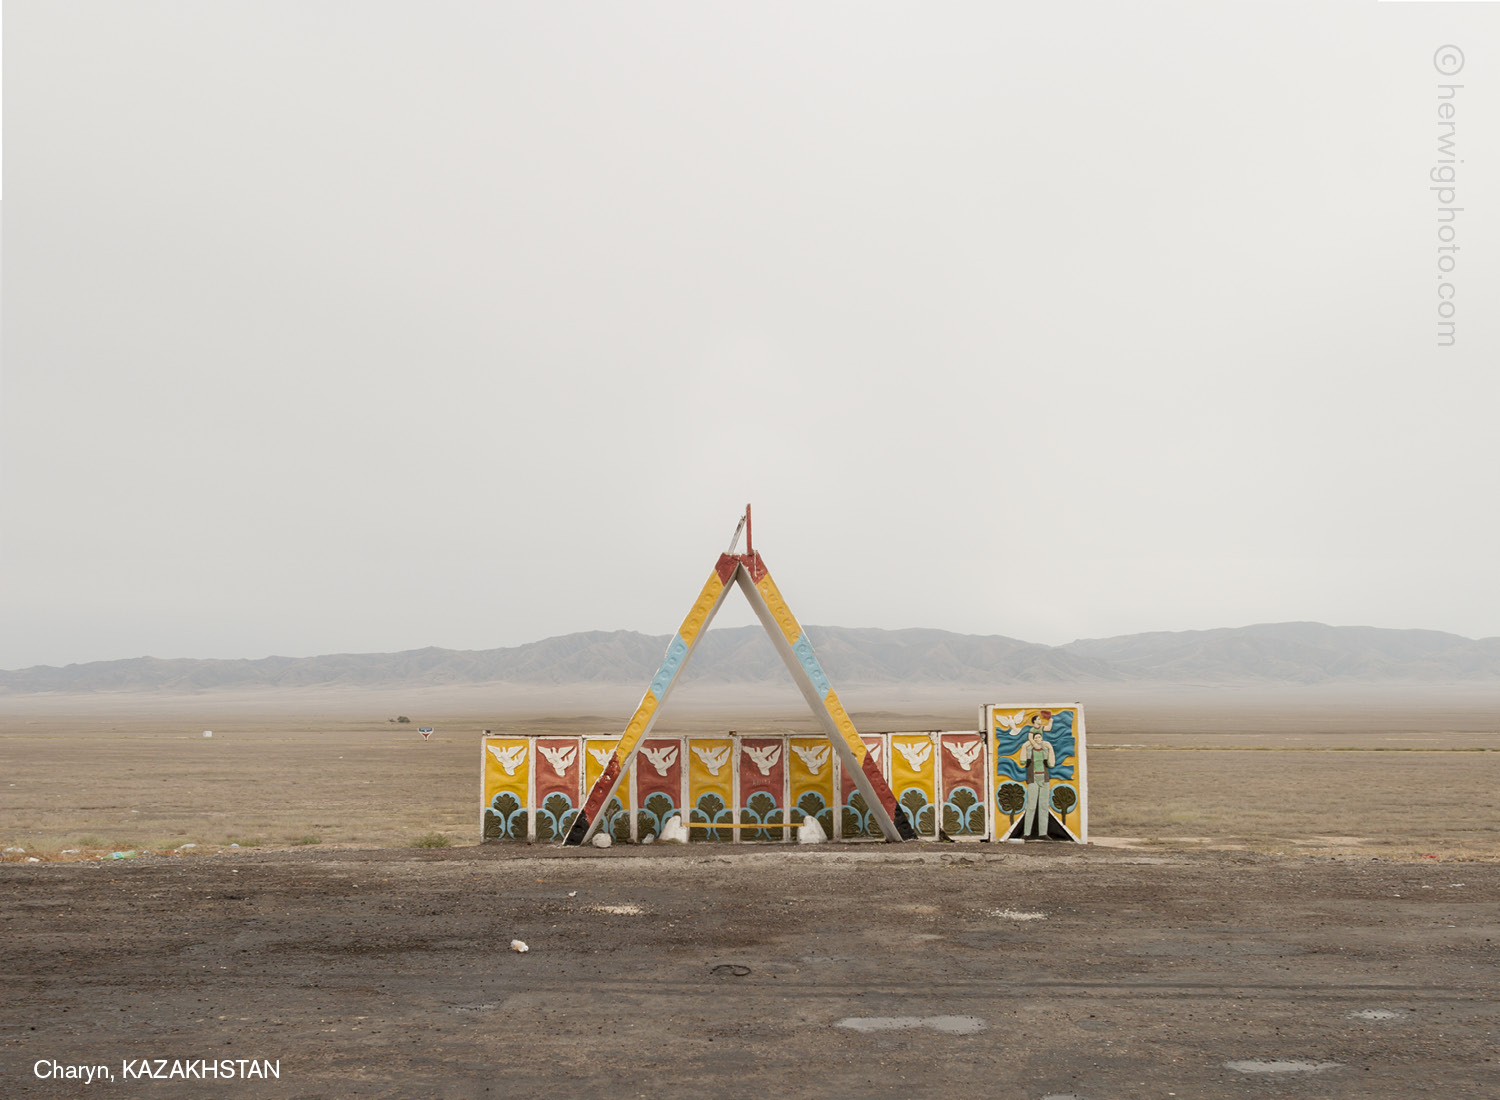 These Bus Stops Left Over From The Soviet Union Are Wonderfully Bizarre